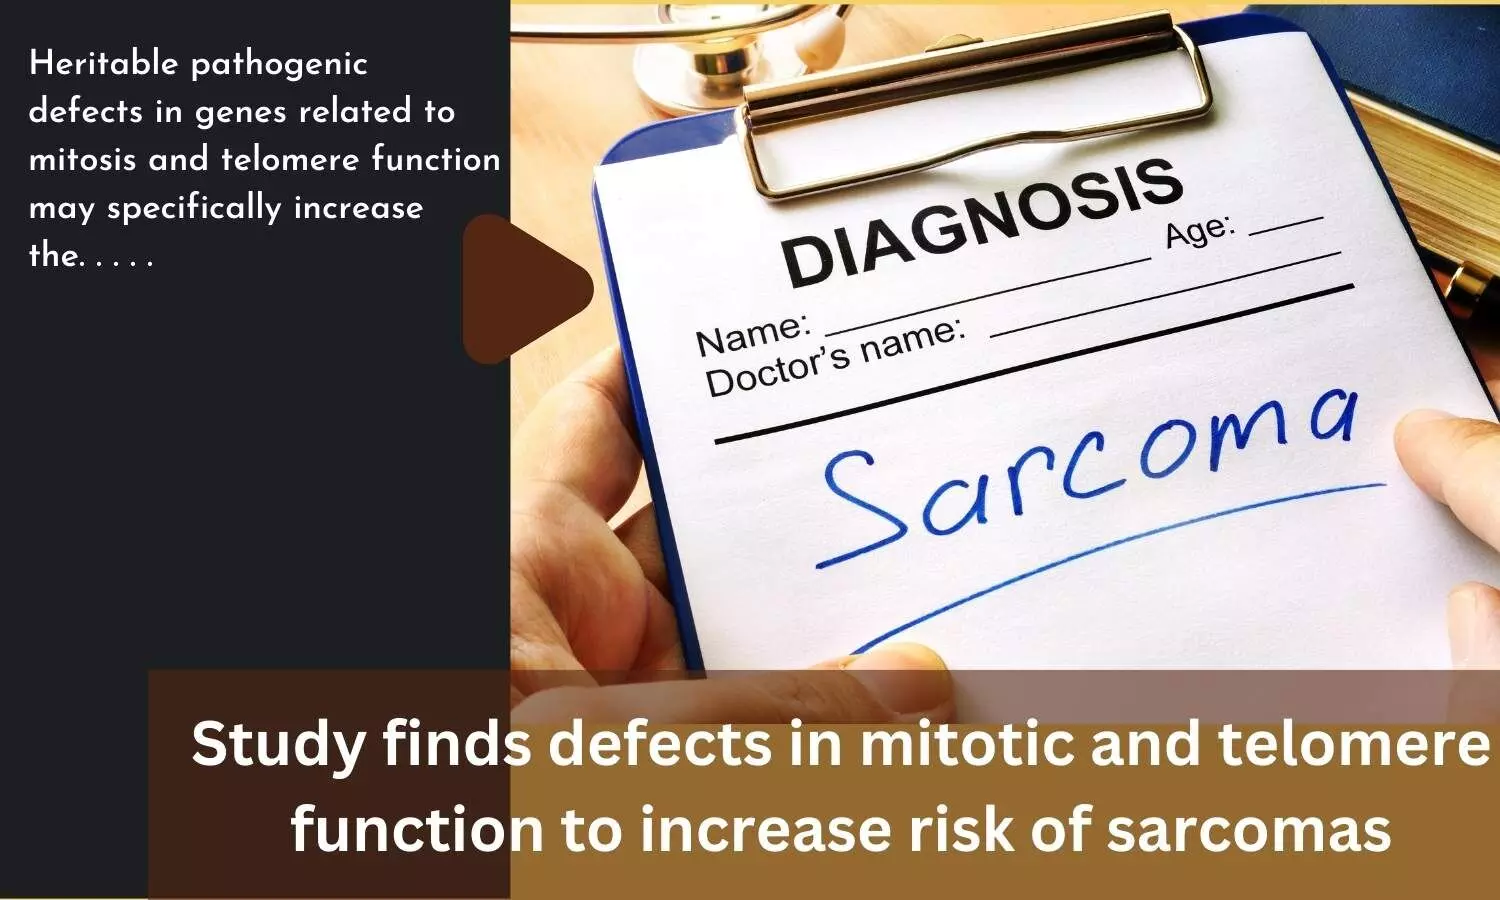 Study finds defects in mitotic and telomere function to increase risk of sarcomas